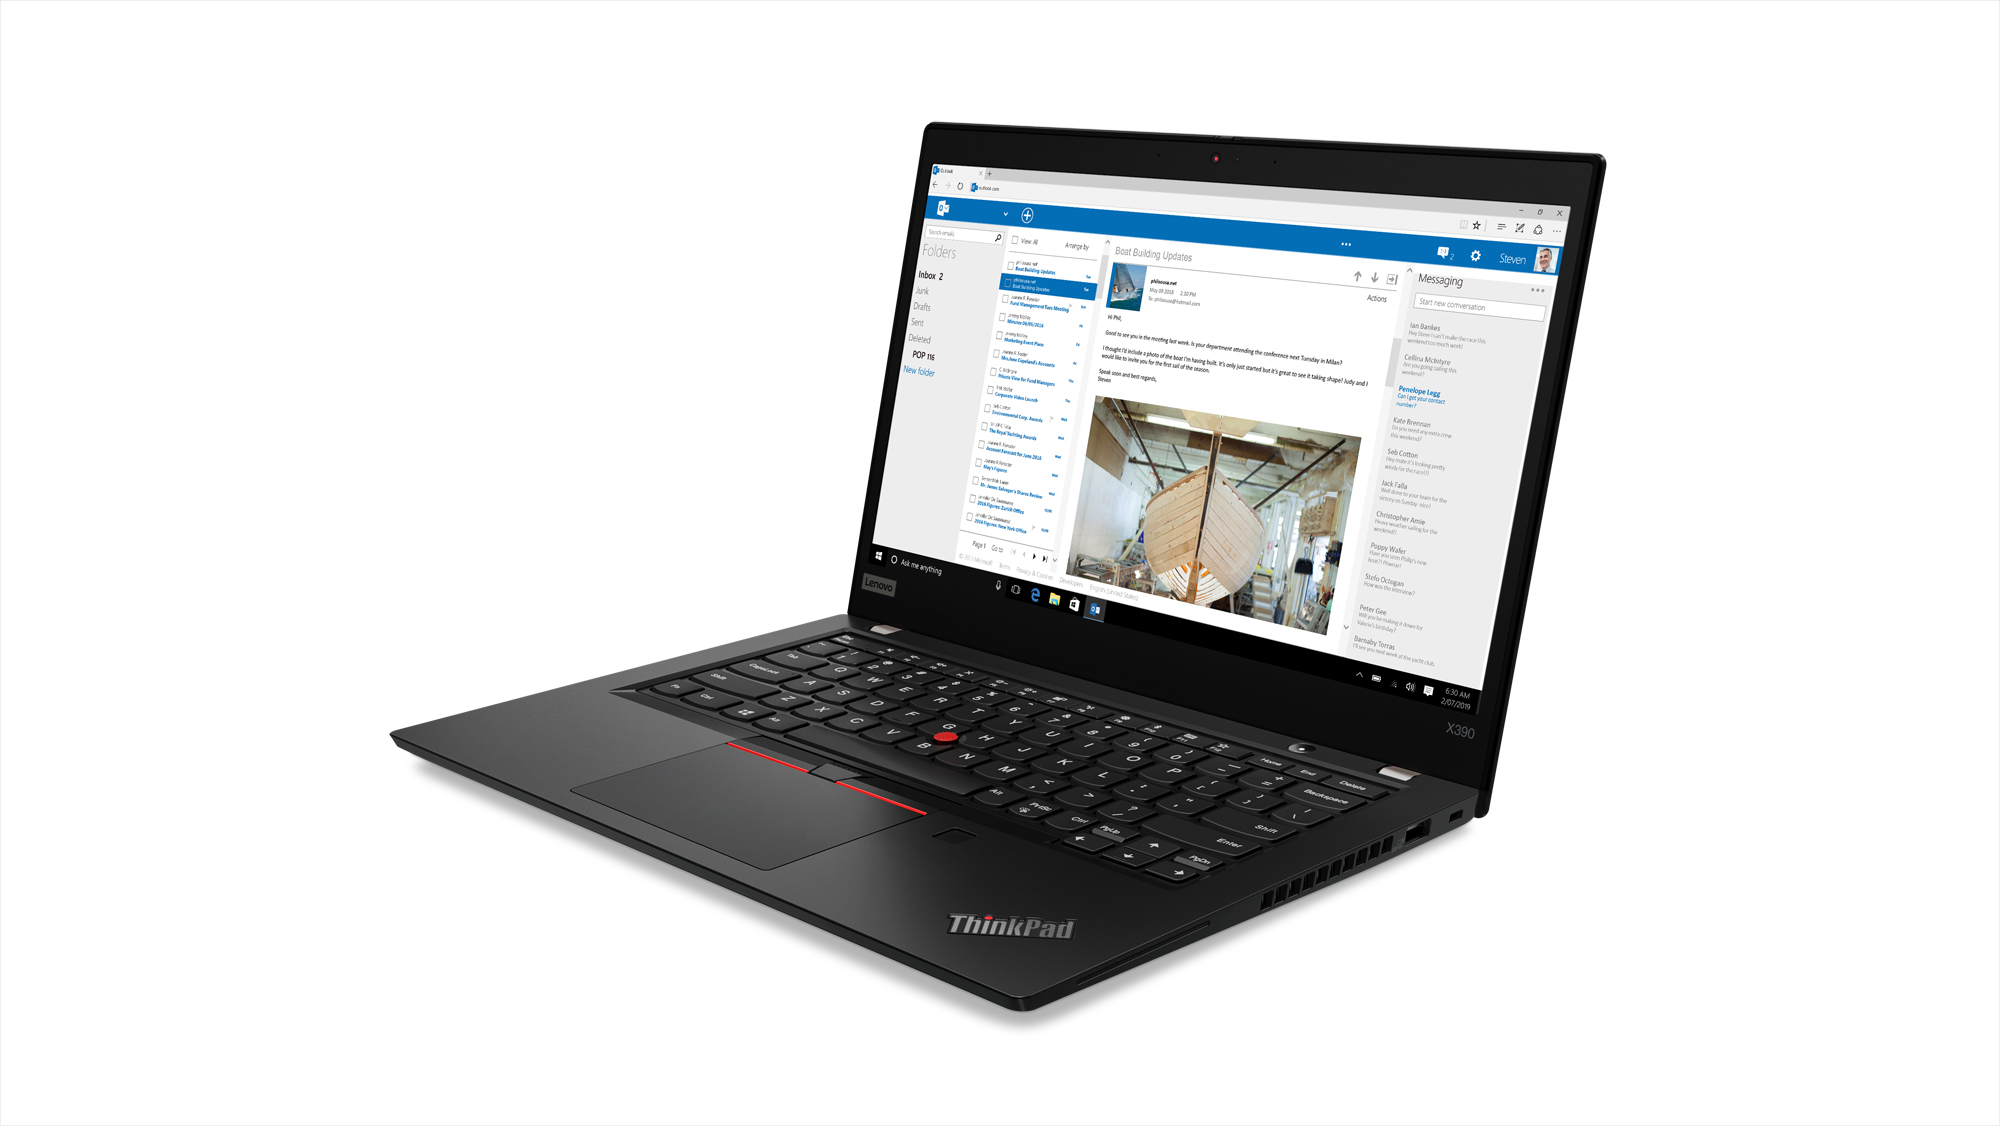 lenovo annouces new thinkpads with 10th gen cometlake thinkpad x390 4